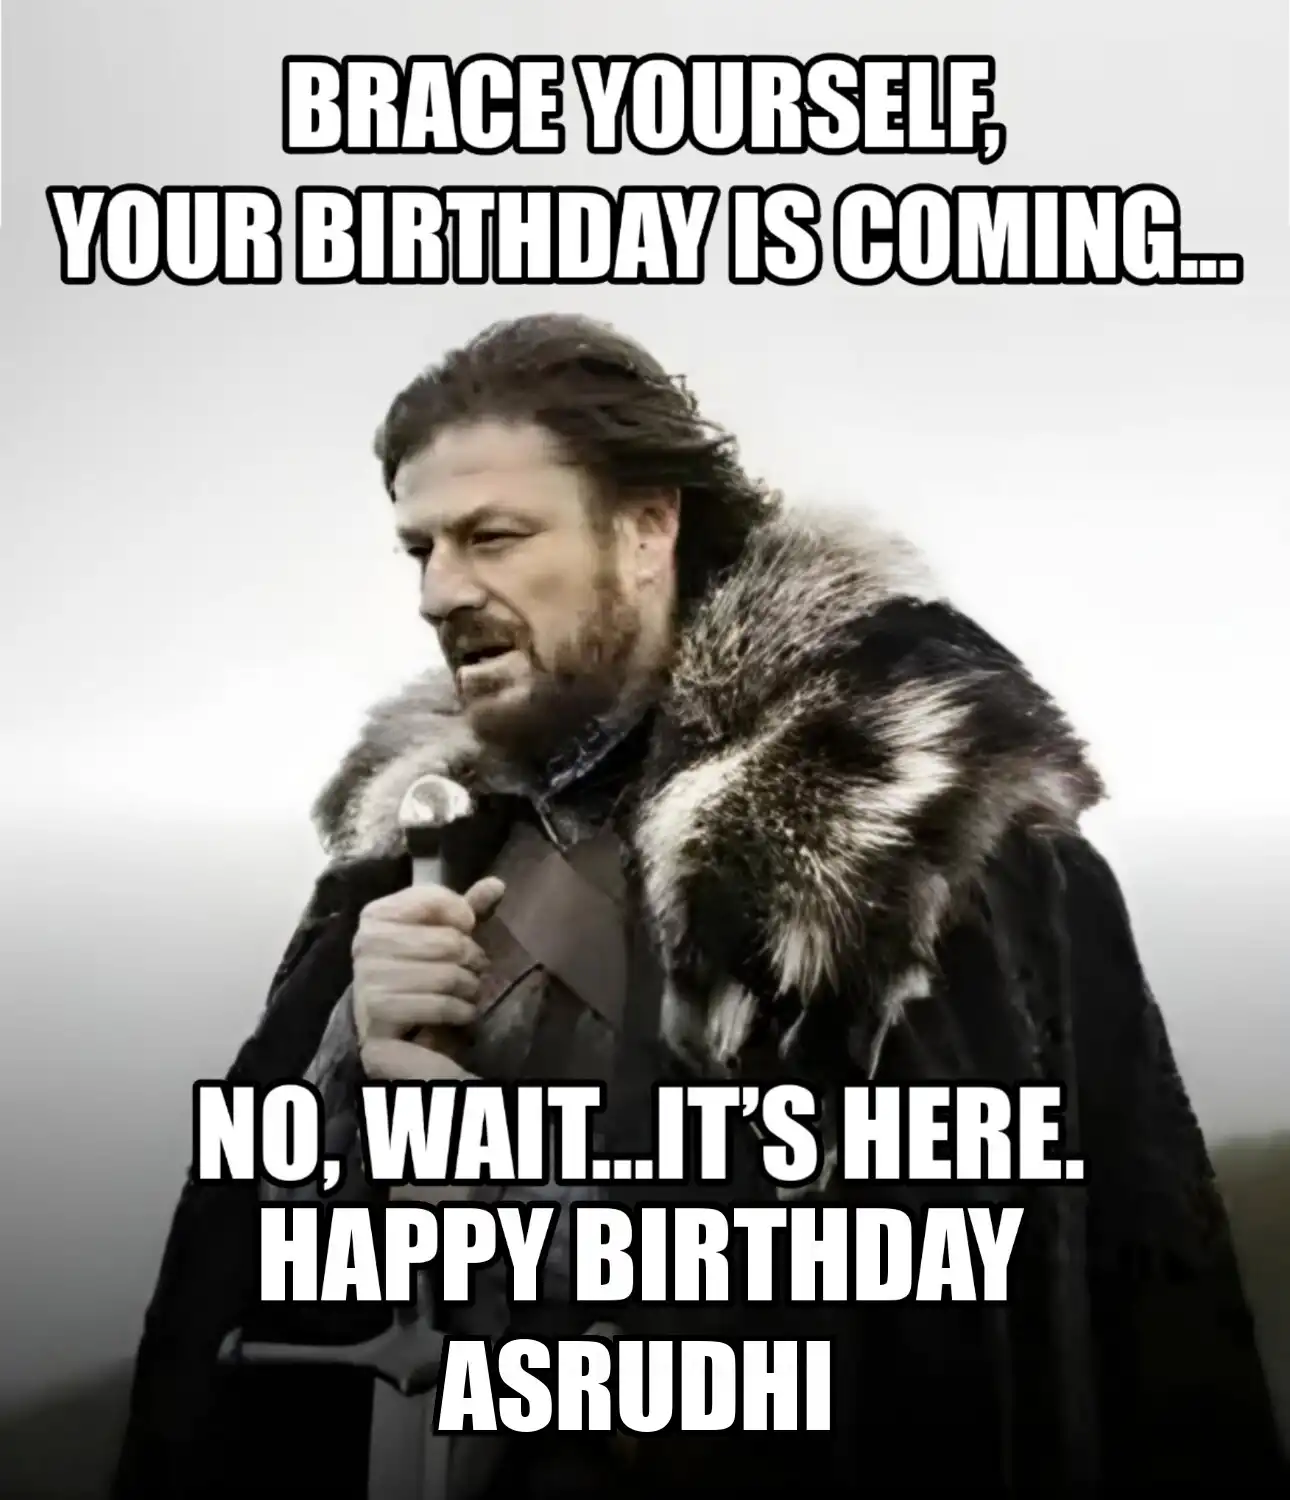 Happy Birthday Asrudhi Brace Yourself Your Birthday Is Coming Meme